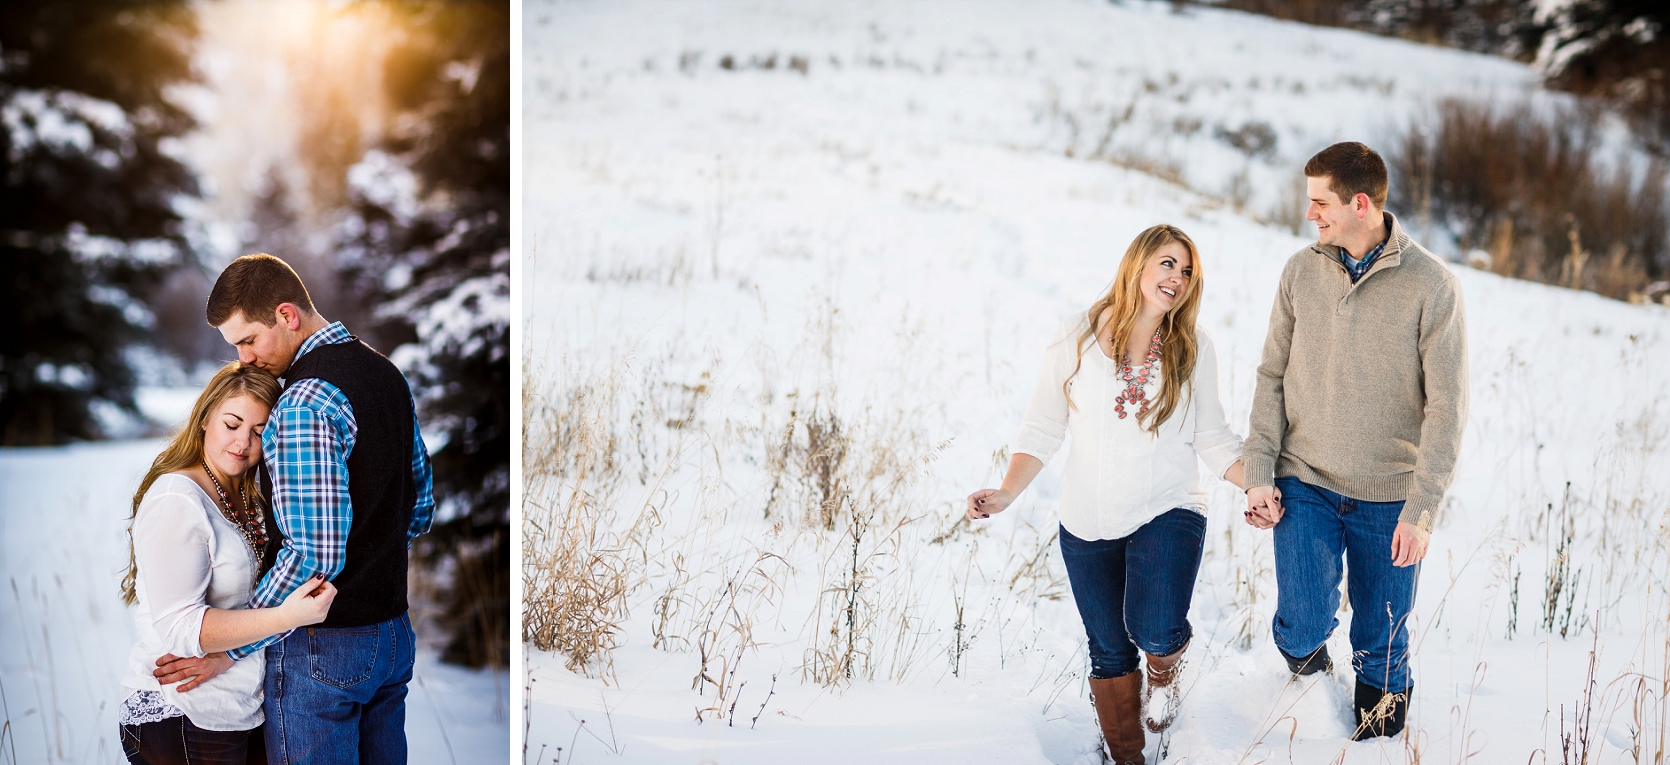 Winter_Engagement_in_Vail_CO_0002a